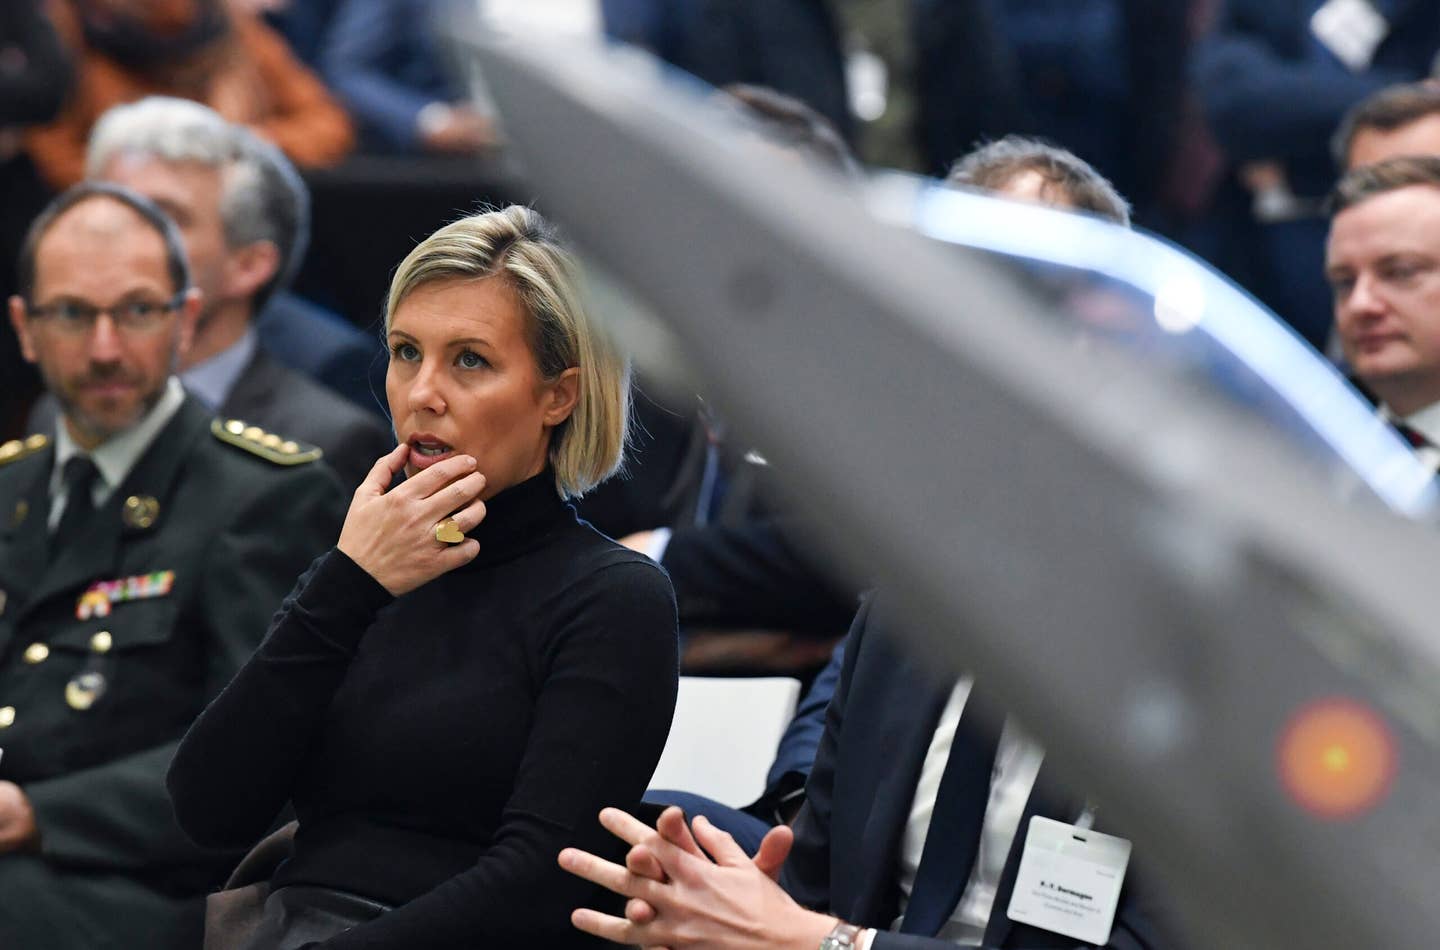 Belgian Minister of Defense Ludivine Dedonder is pictured during the inauguration ceremony at a new SABCA production hall for the horizontal tailplane of the F-35 fighter aircraft, in Lummen, on March 10, 2022. <em>Photo by JOHN THYS/BELGA MAG/AFP via Getty Images</em>